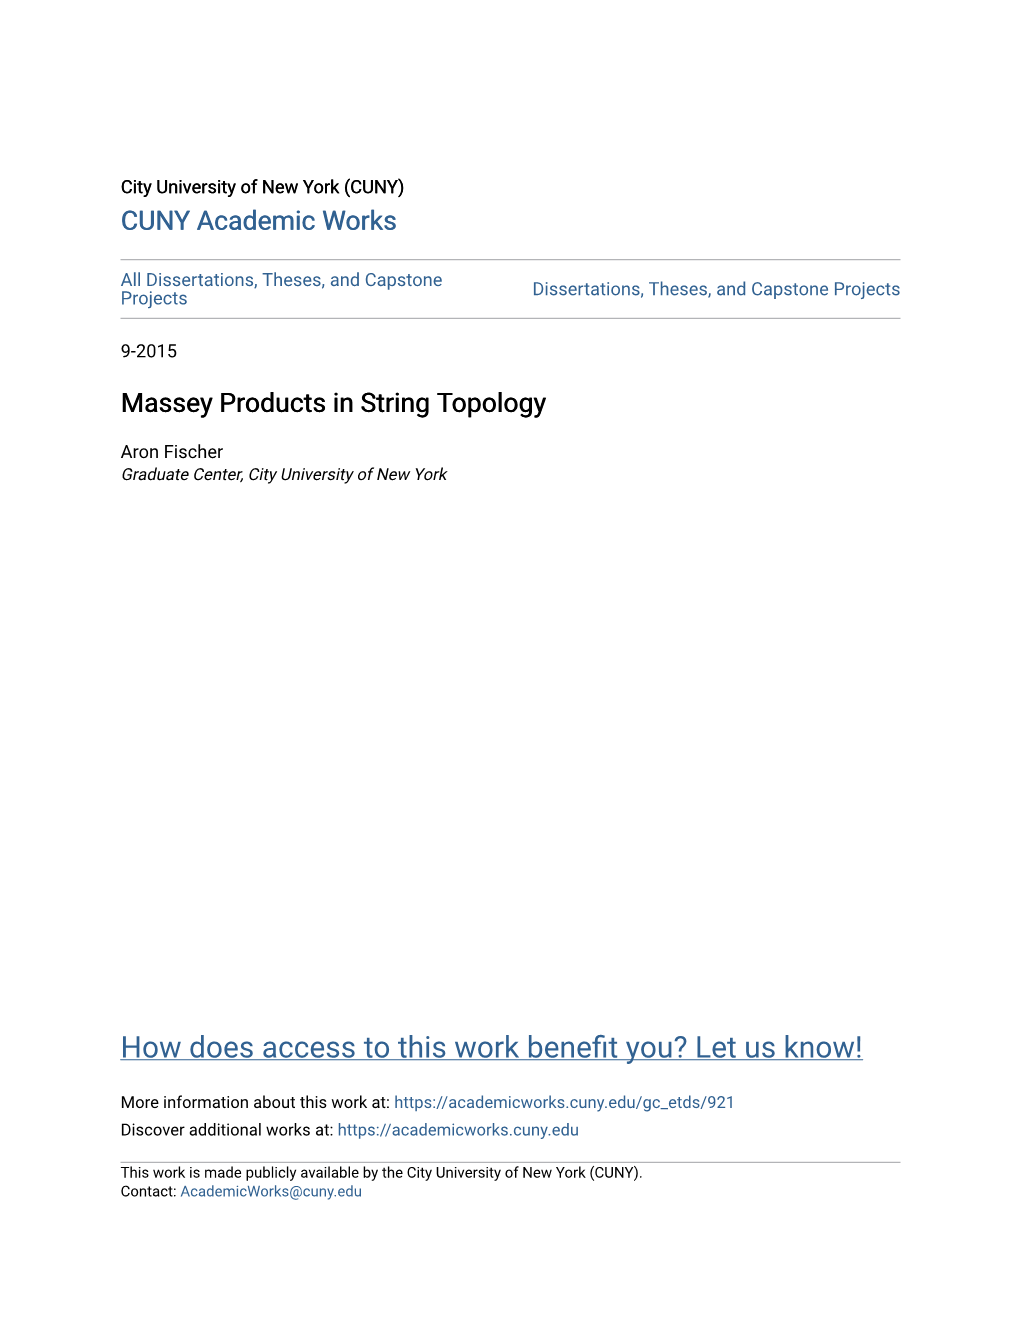 Massey Products in String Topology